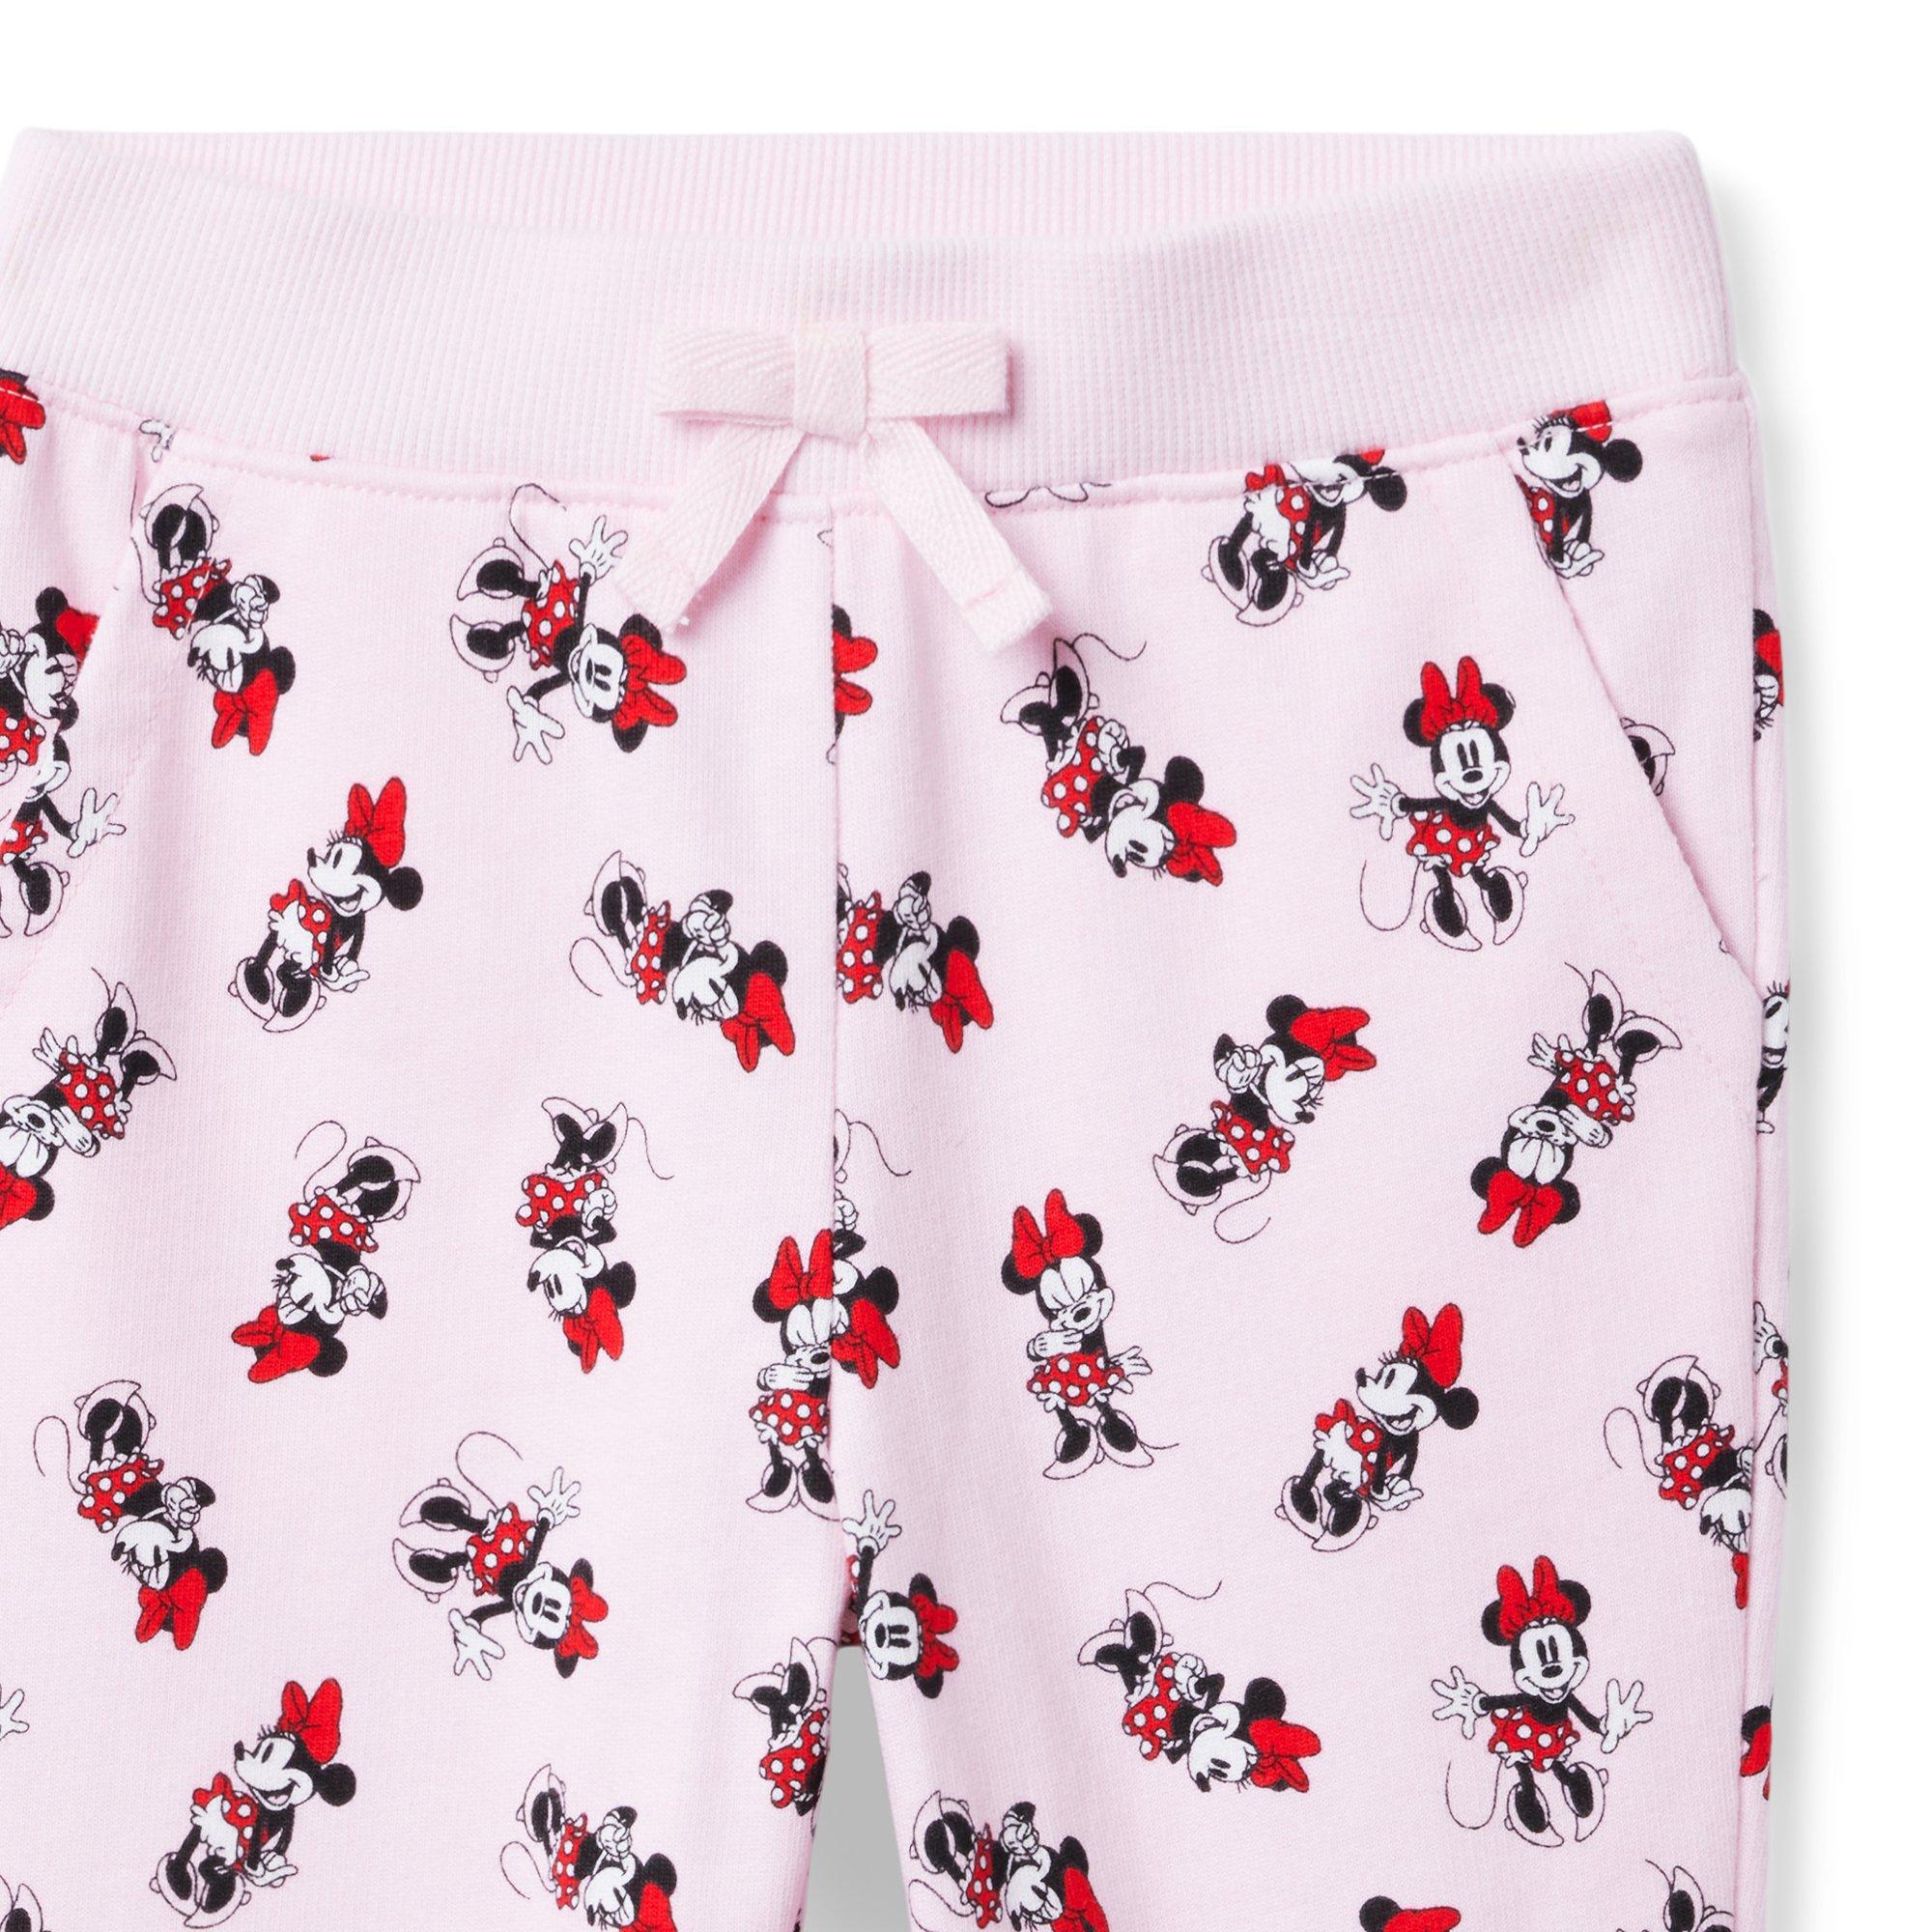 Girl Fifties Pink Minnie Mouse Disney Minnie Mouse Jogger by Janie